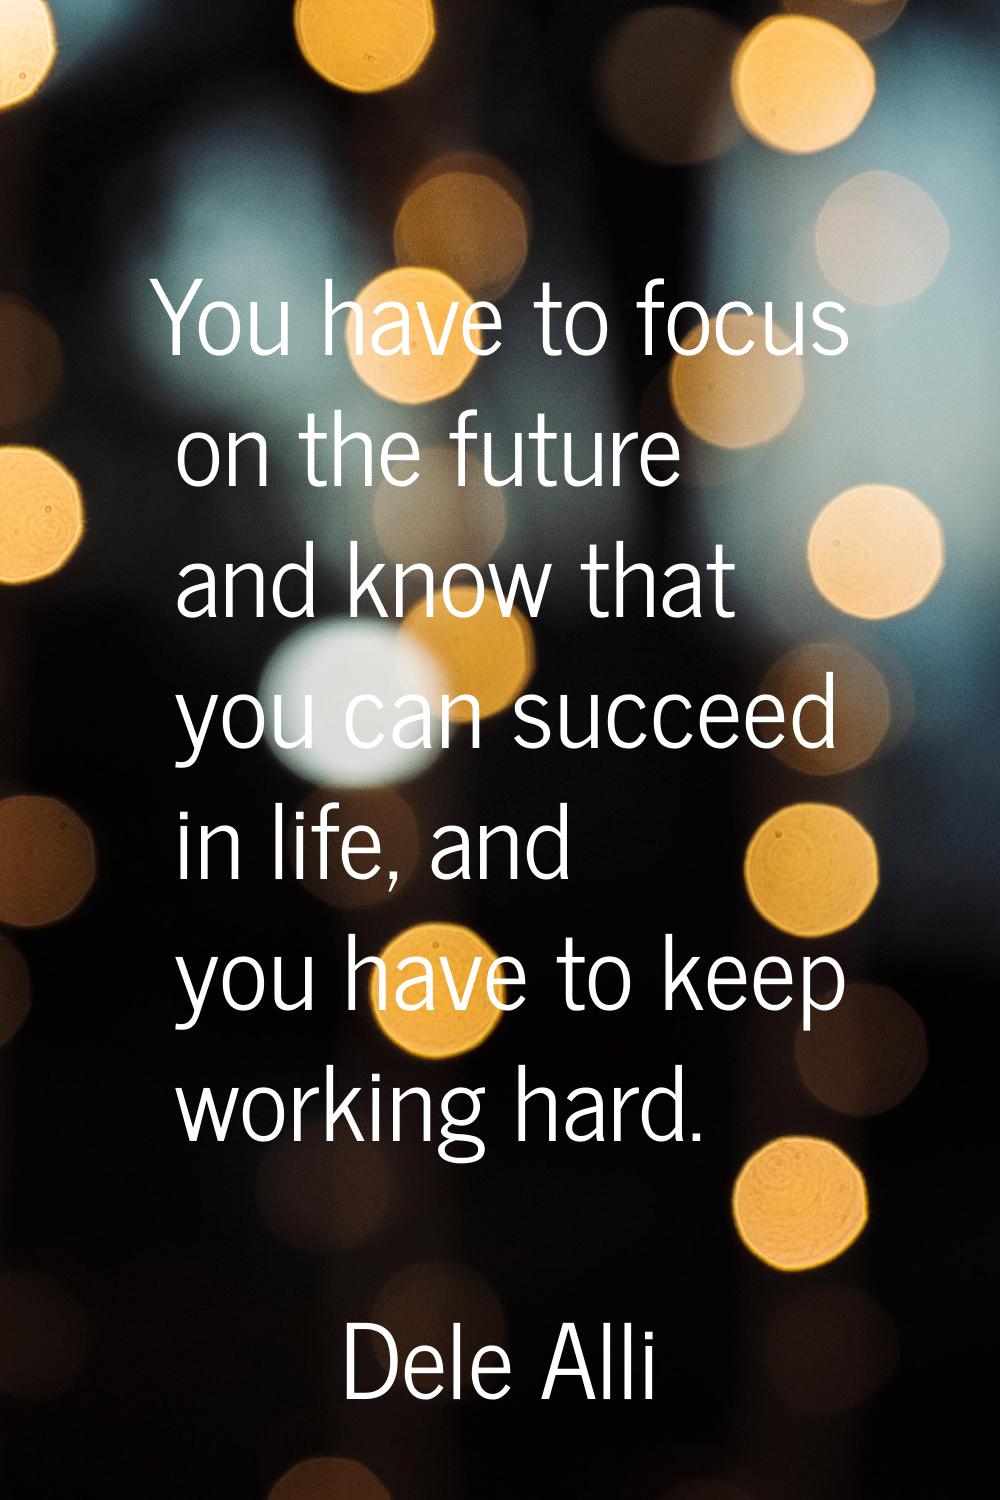 You have to focus on the future and know that you can succeed in life, and you have to keep working